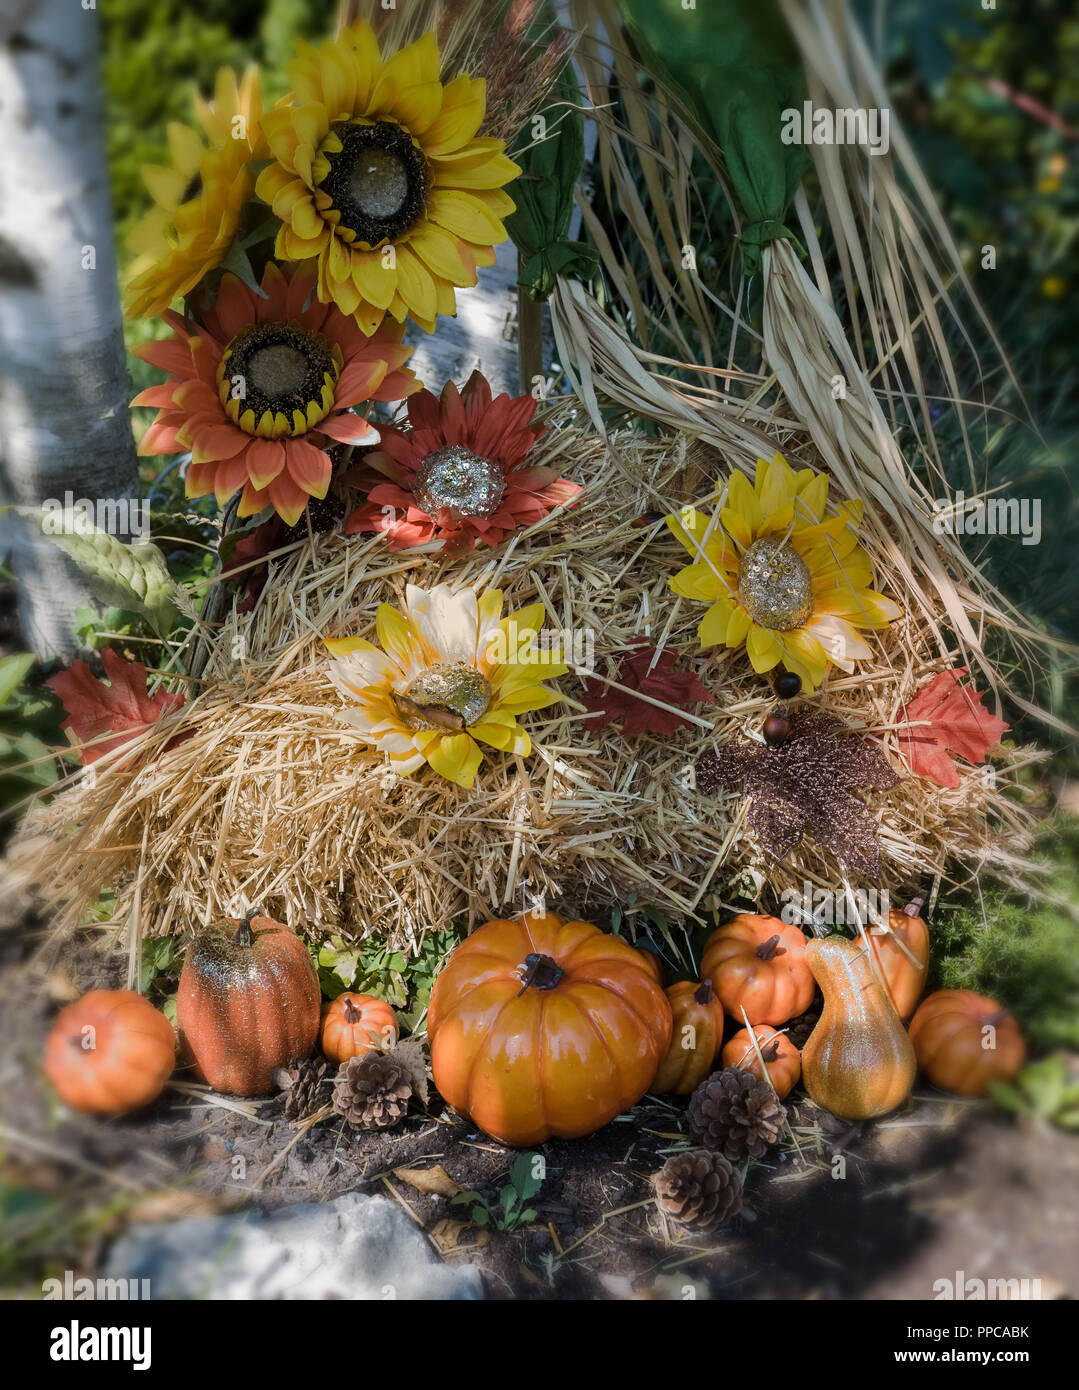 Sunflowers, straw, pumpkins, all decorations for Halloween. Stock Photo